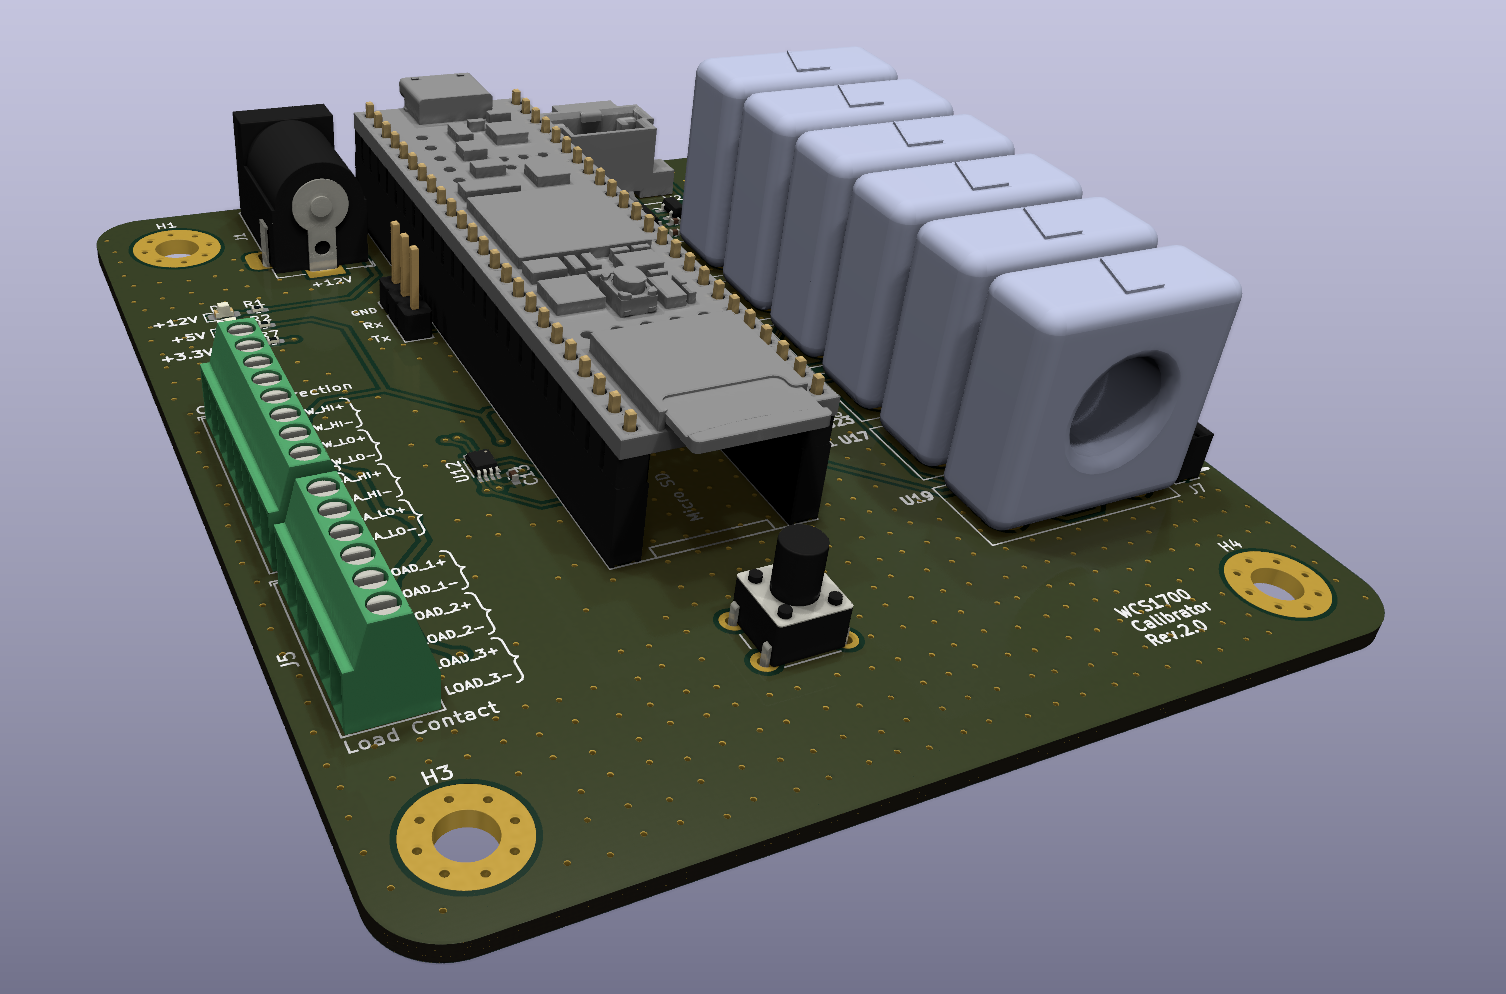 Rendering of the completed PCB